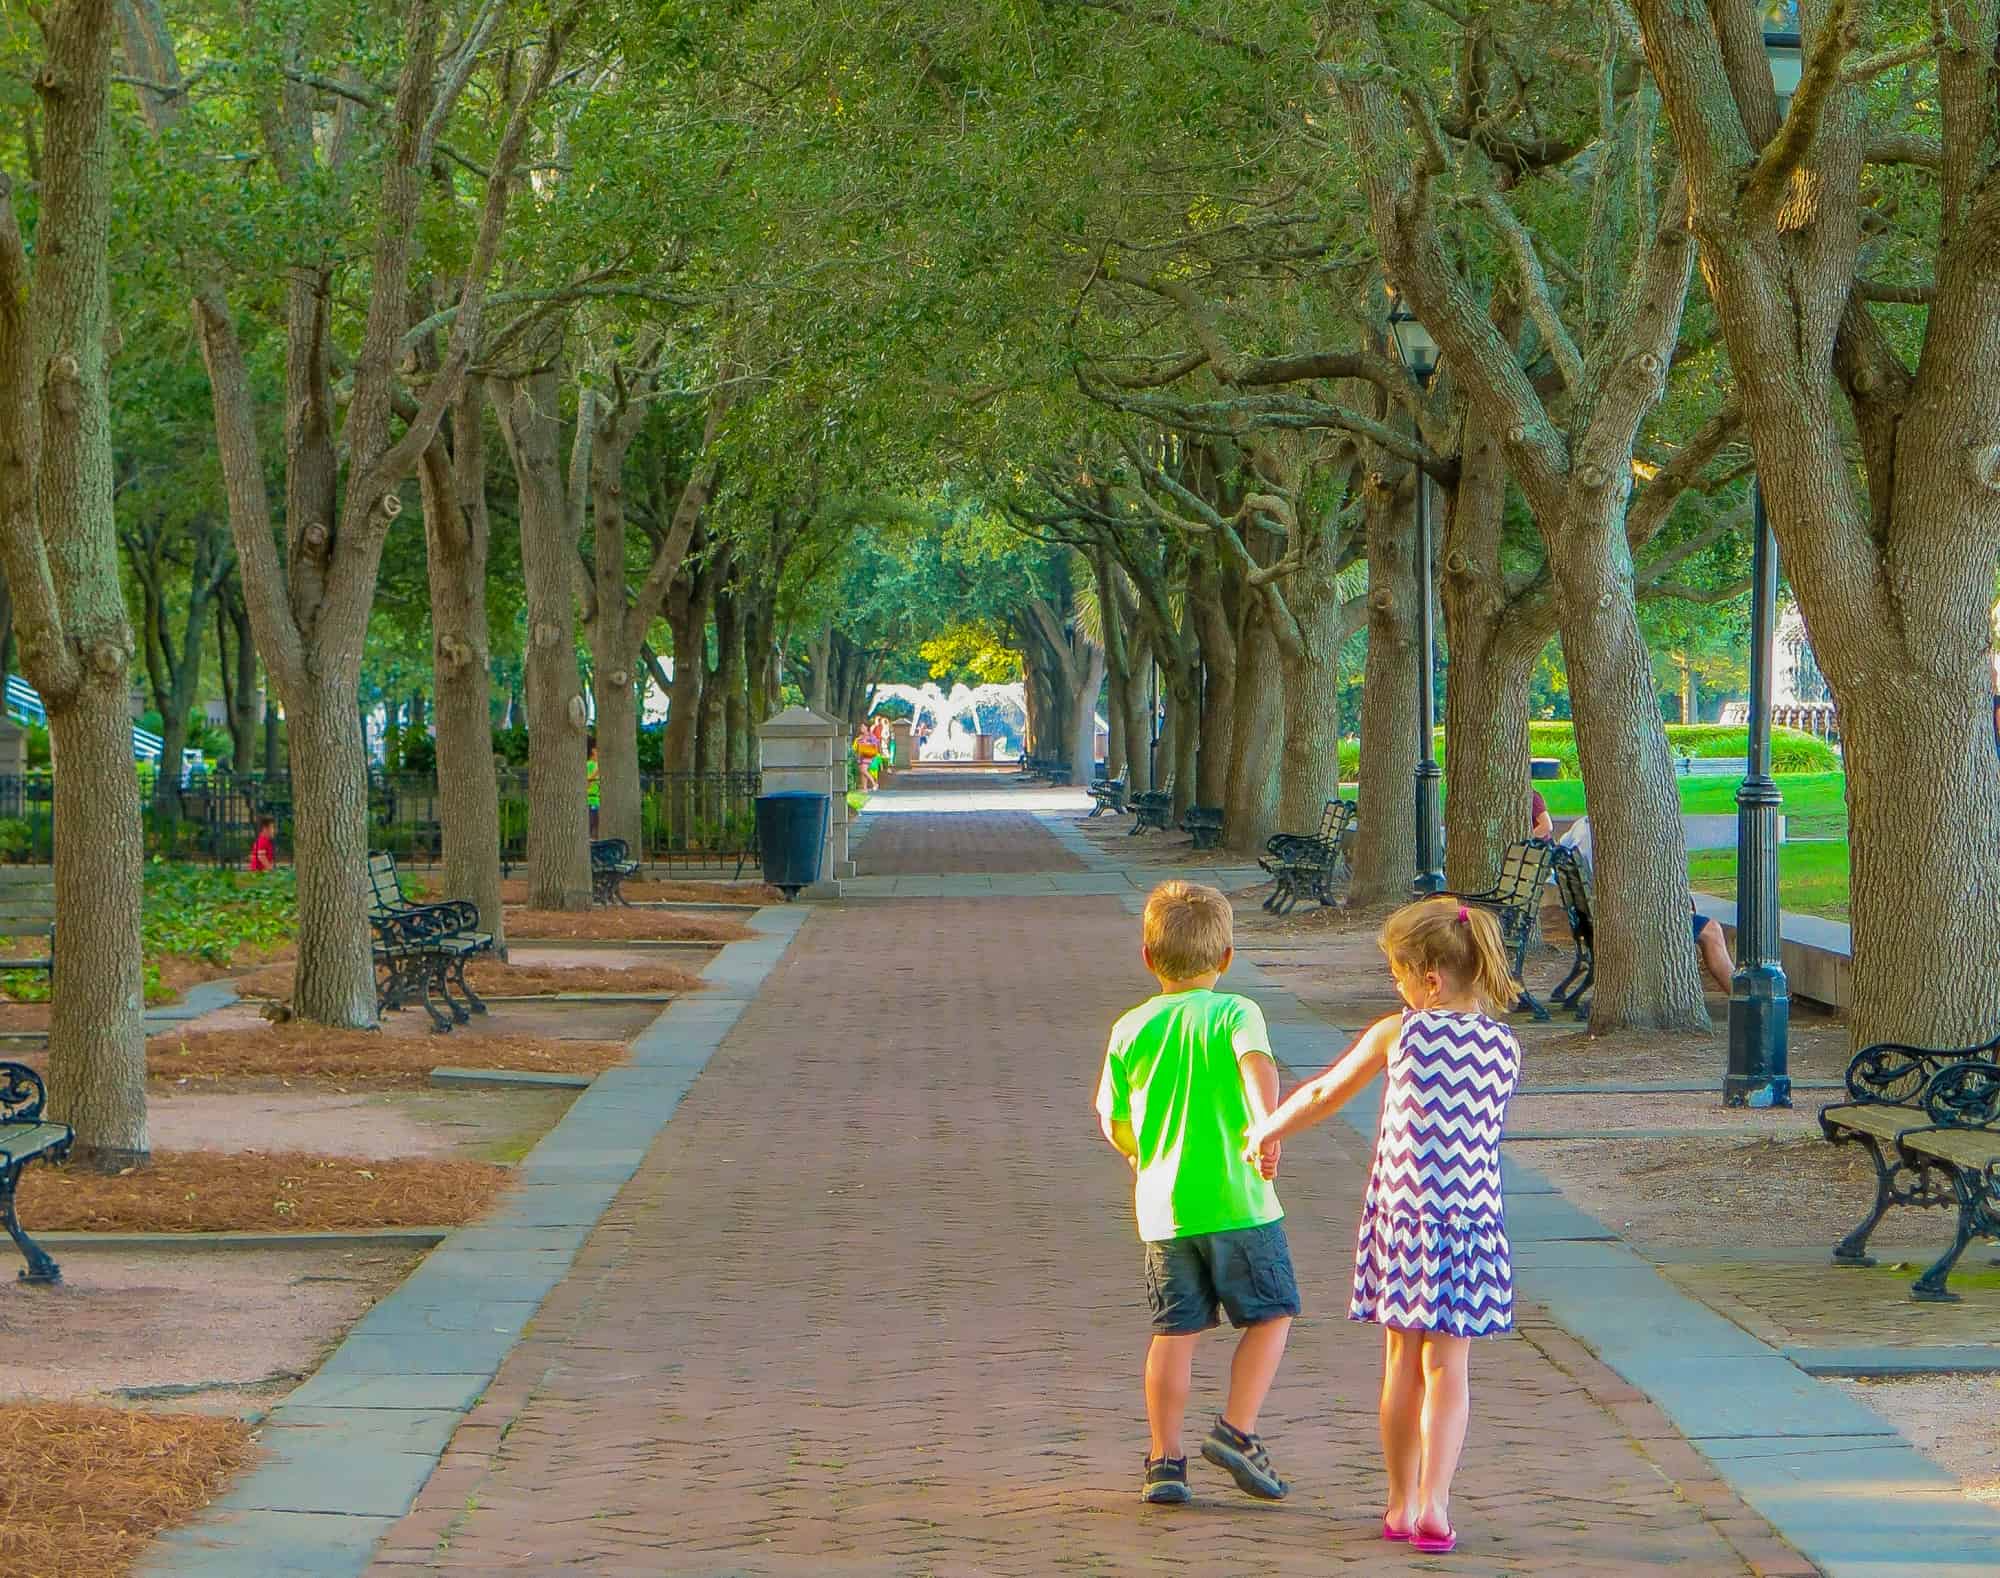 cool things to do in charleston sc